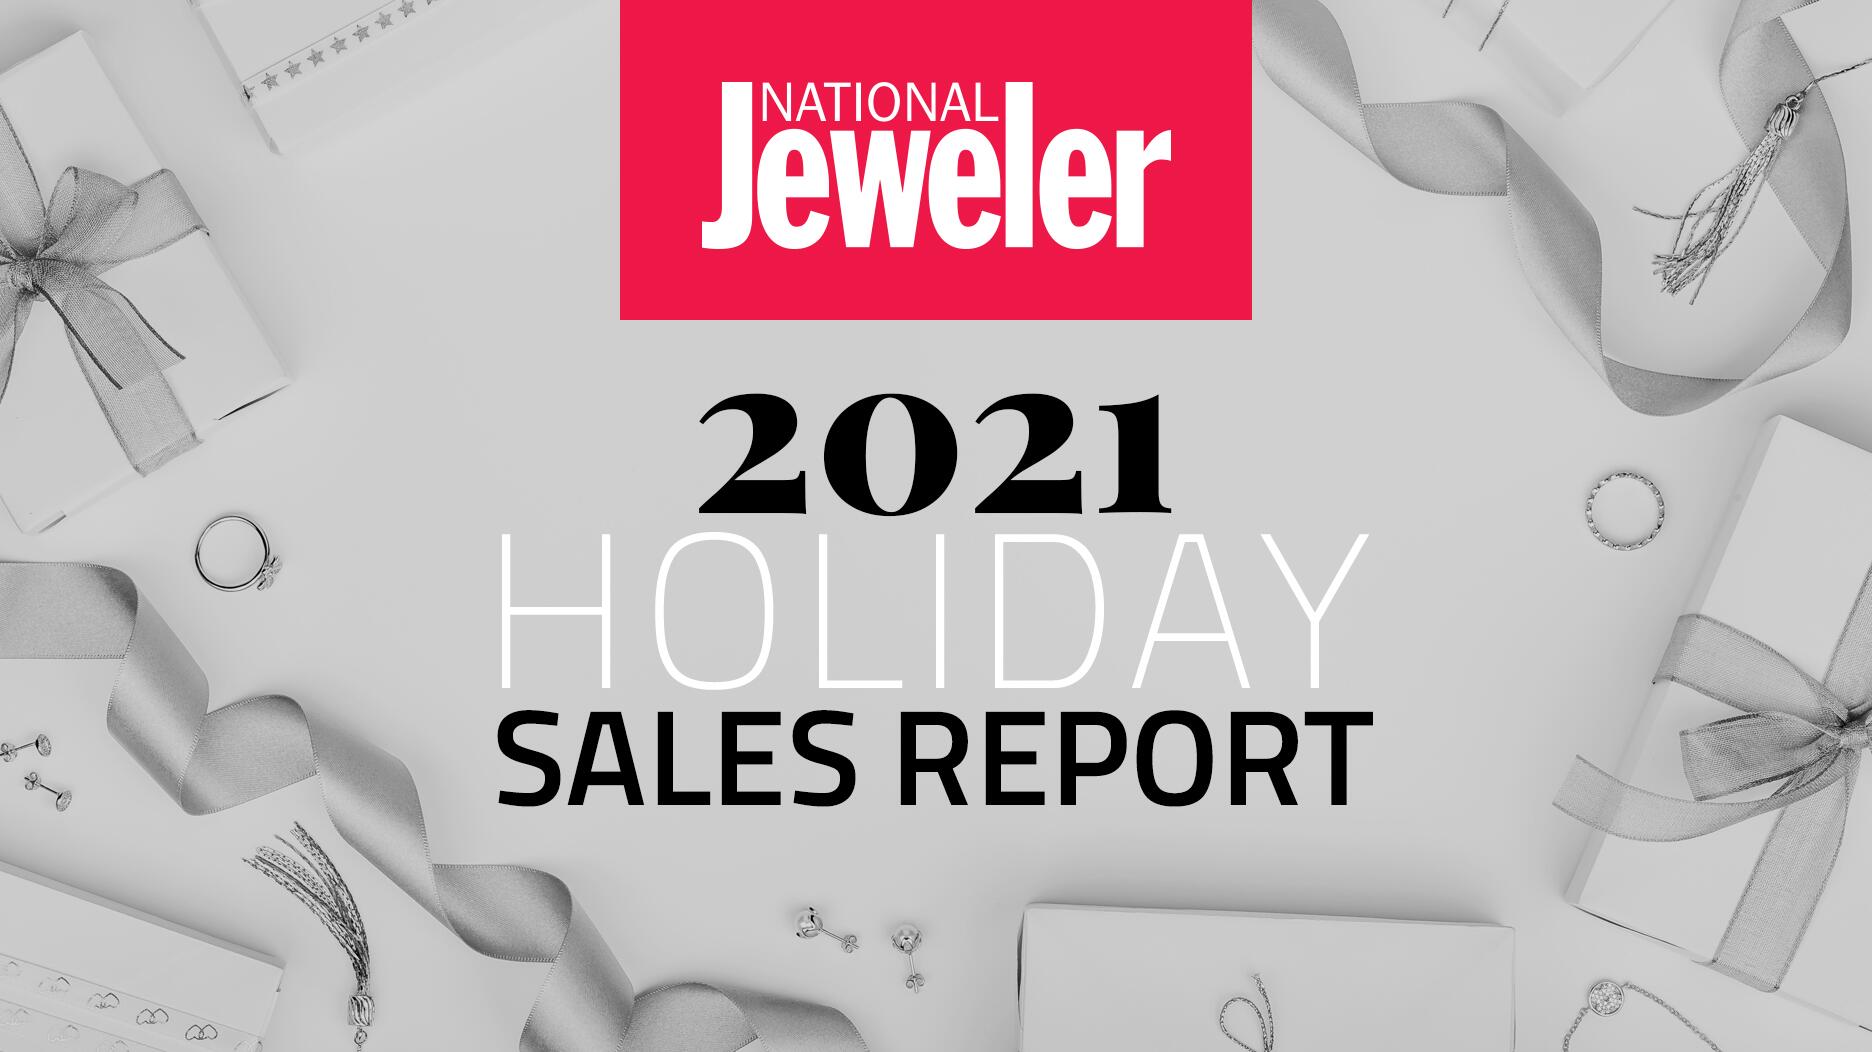 holiday21-sales-report-1872x1052.jpg